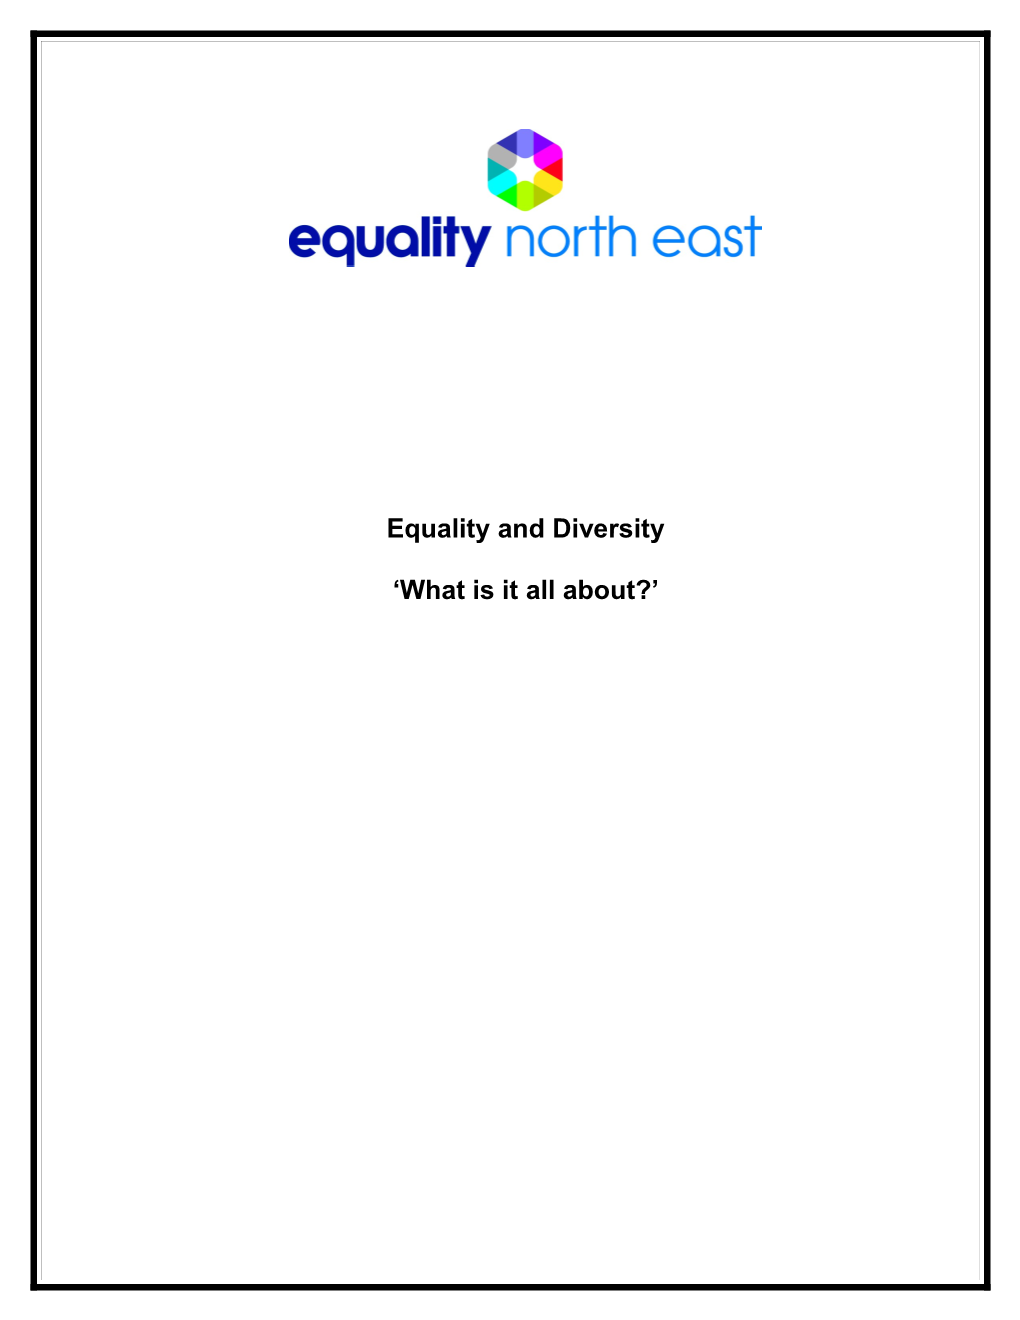 What Do We Mean by Equality and Diversity 3 - 4